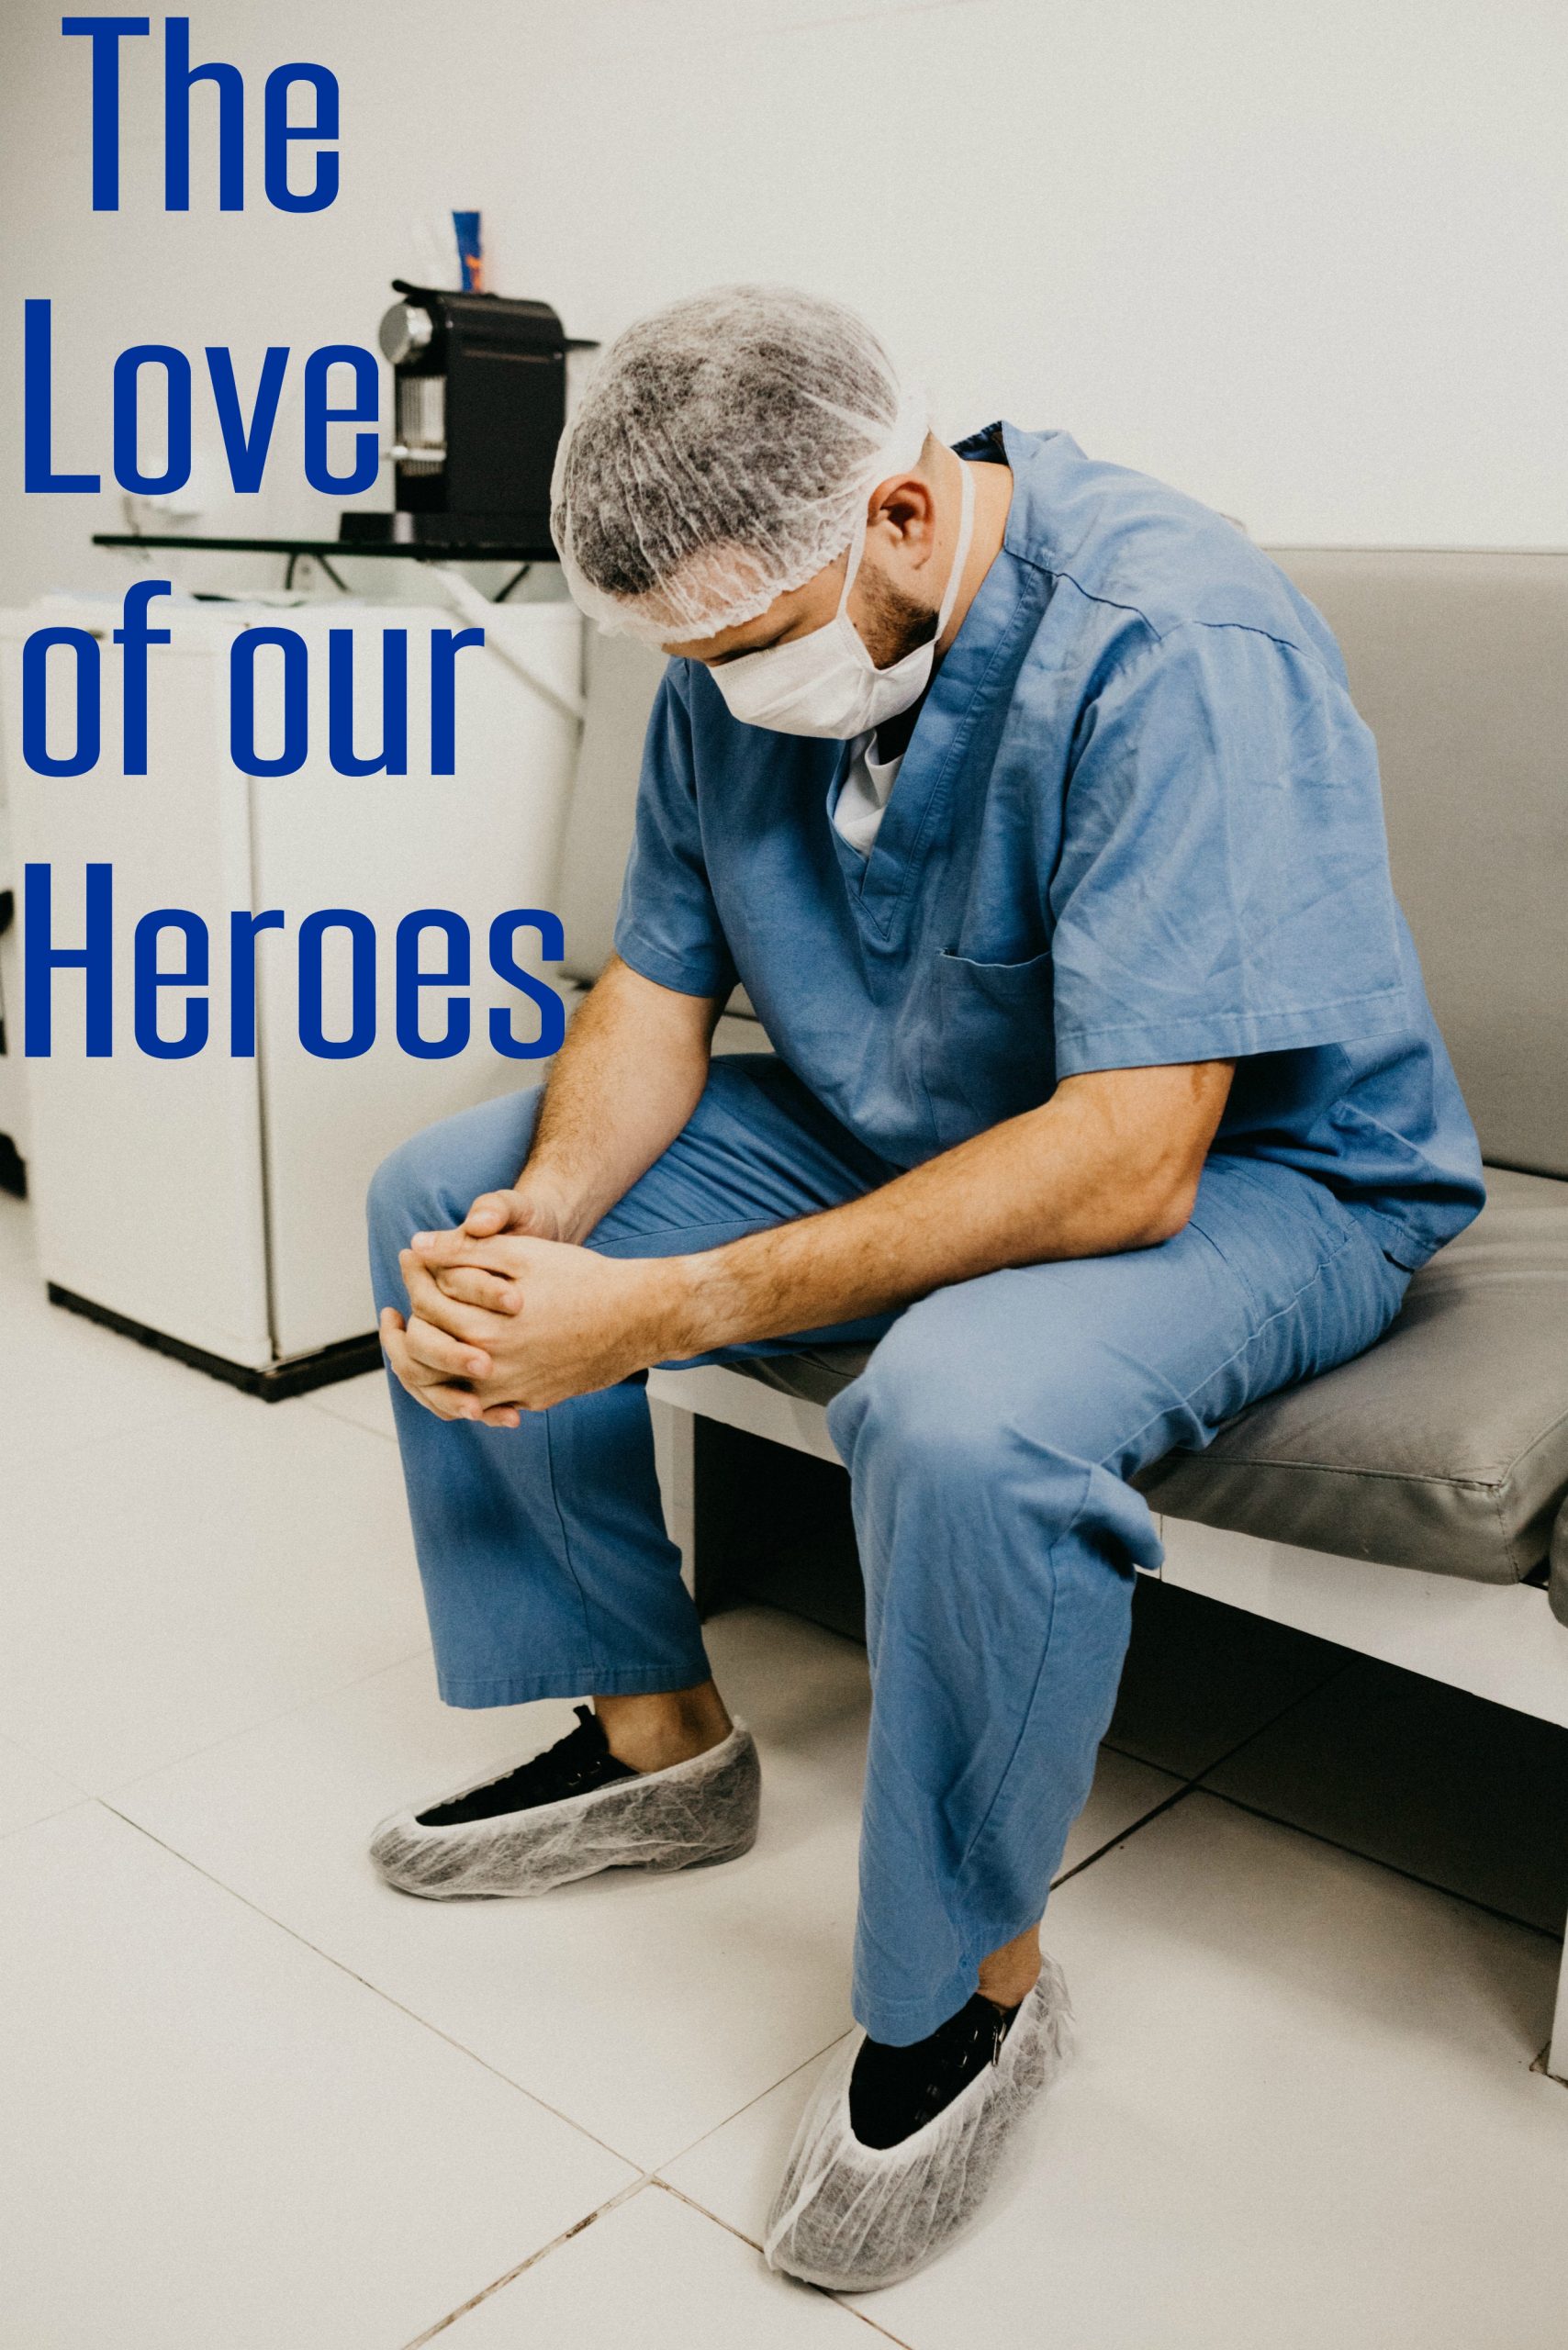 The love of our heroes